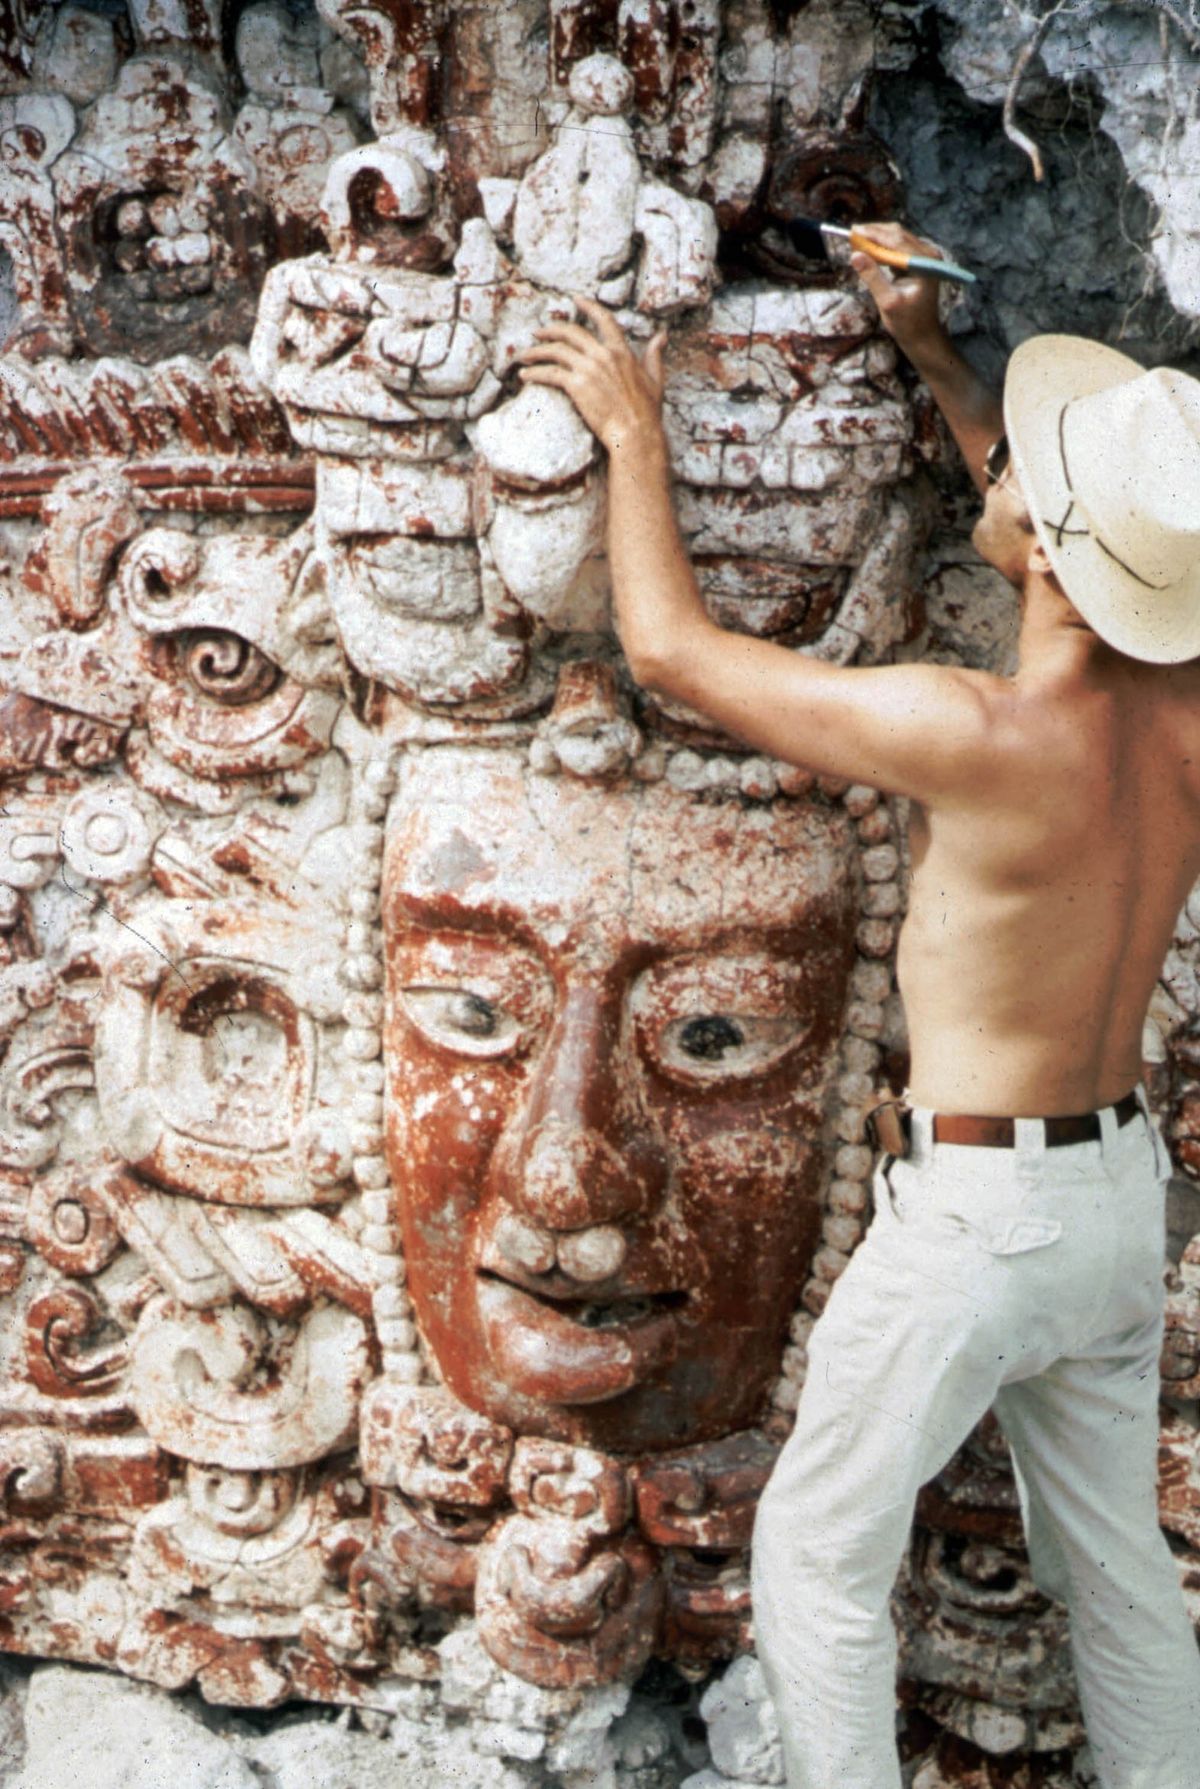 Maya temple façade at Placeres, Mexico, being looted. Credit: Donna Yates. Provided by David Friedel and reproduced with permission from the original photographer